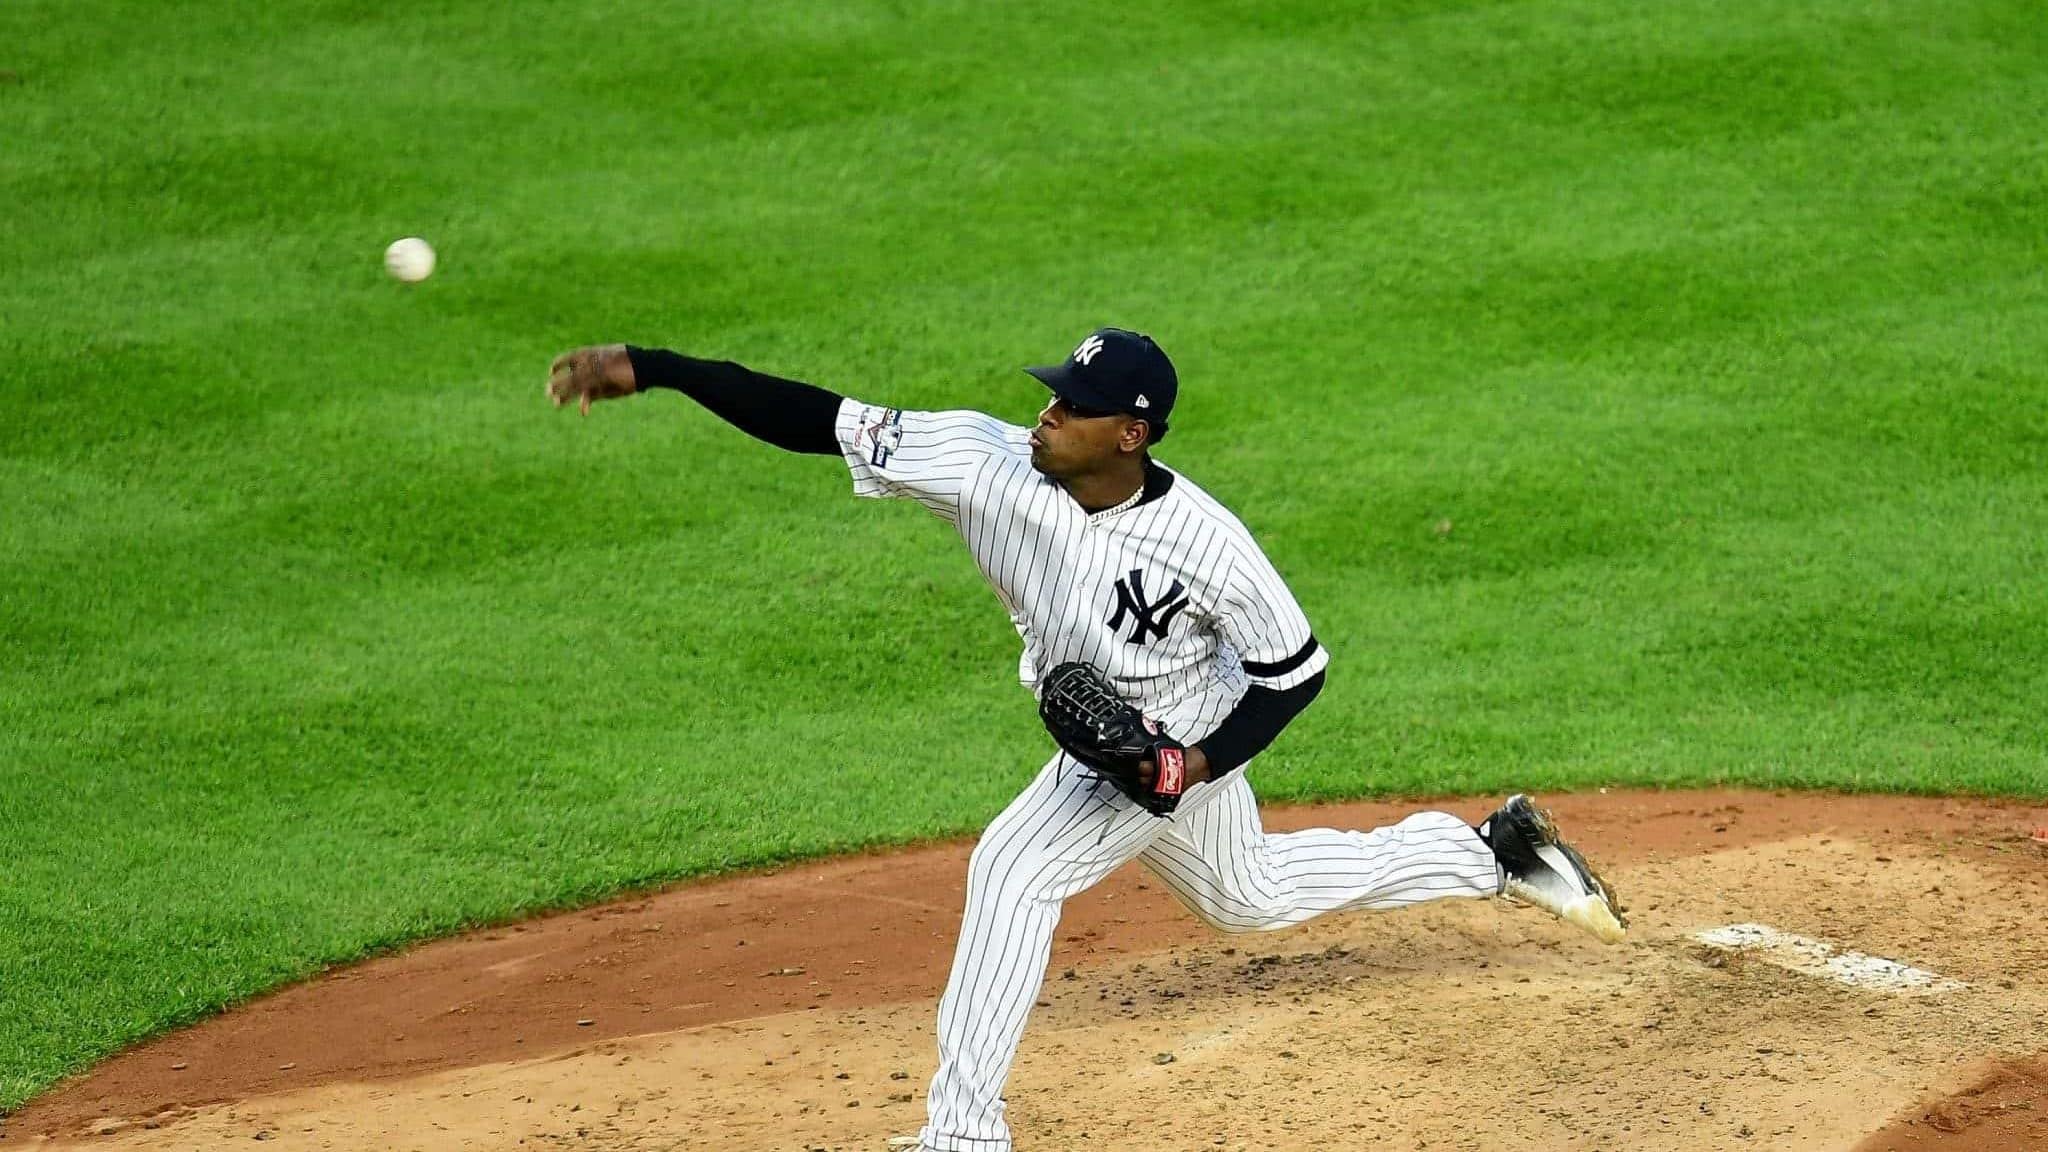 NEW YORK, NEW YORK - OCTOBER 15: Luis Severino #40 of the New York Yankees delivers a pitch in the fifth inning of their game against the Houston Astros during game three of the American League Championship Series at Yankee Stadium on October 15, 2019 in the Bronx borough of New York City.